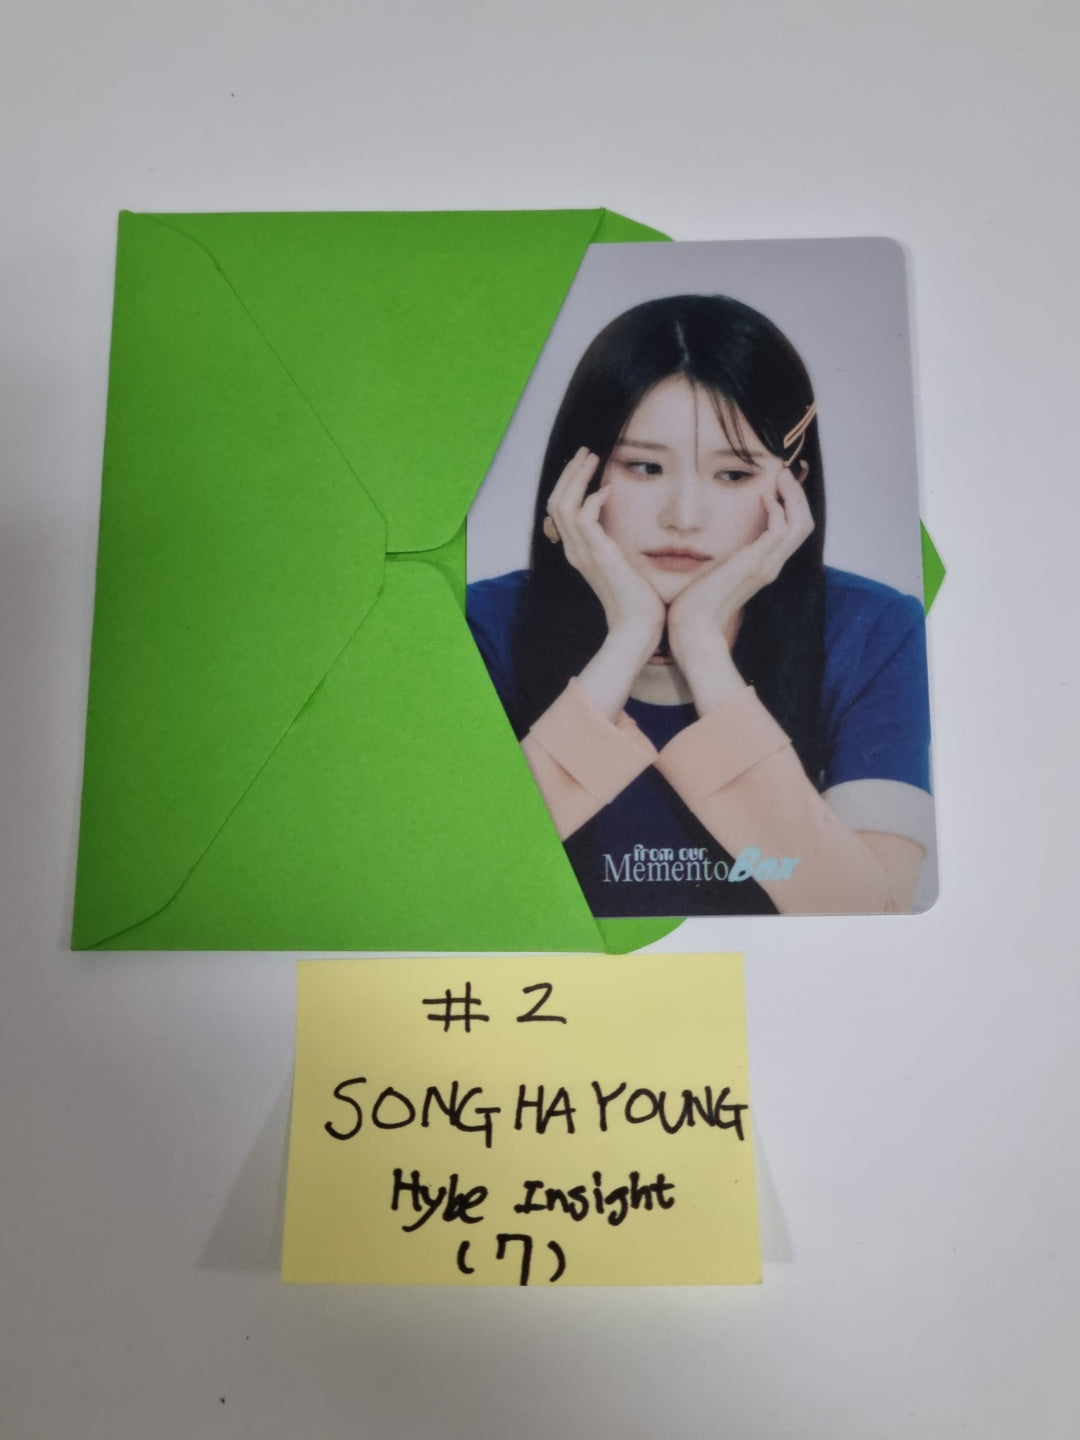 Fromis_9 "from our Memento Box" - Hybe Insight イベント PVC フォトカード